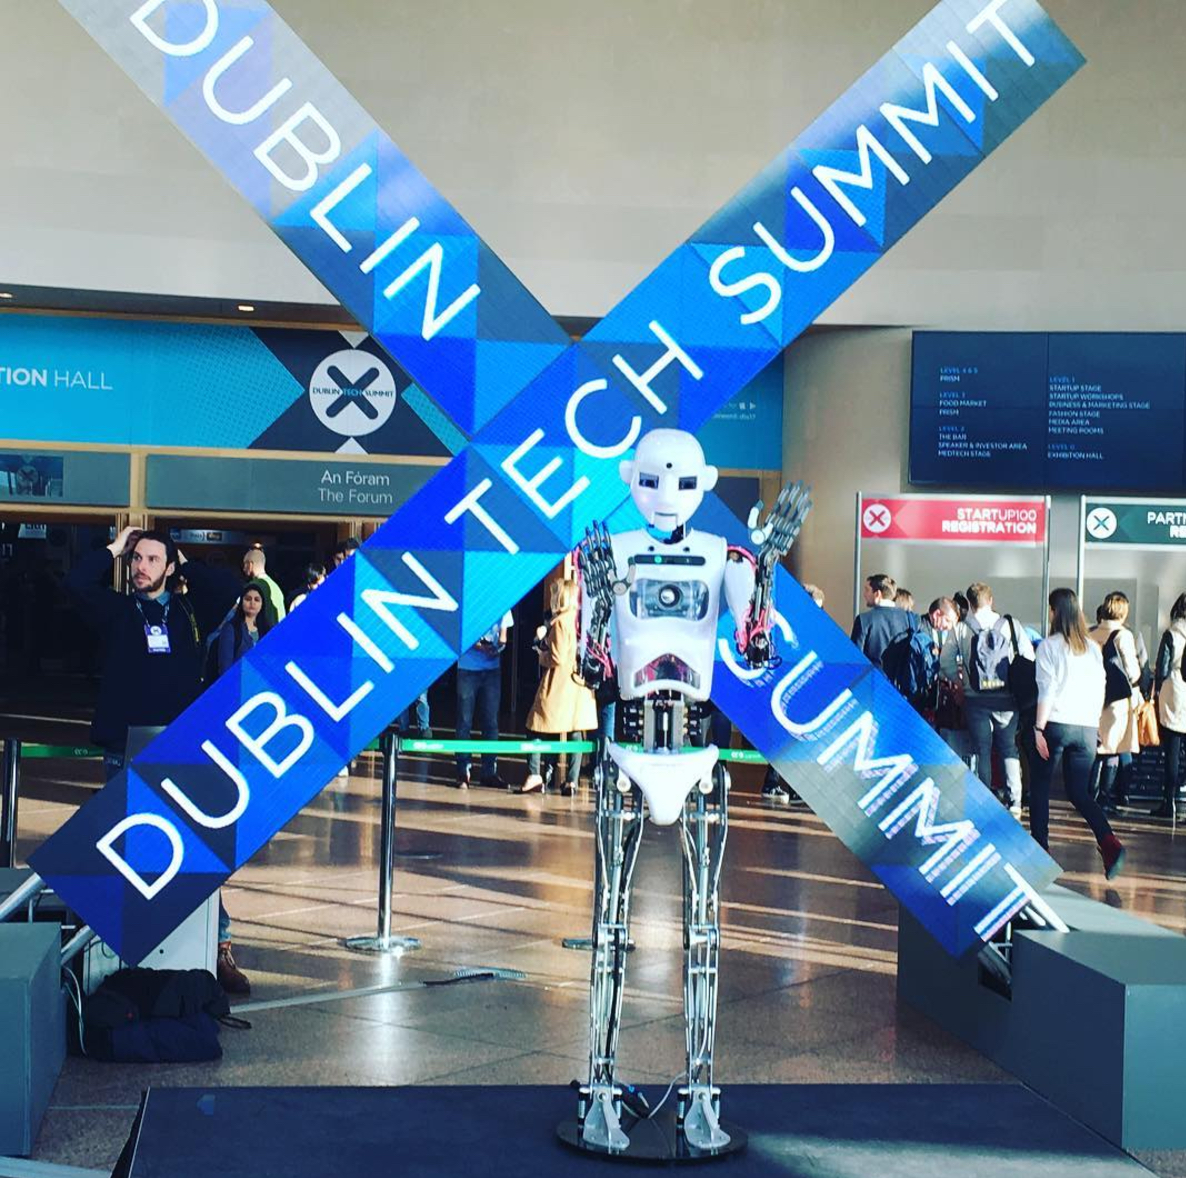 Dublin Tech Summit 2017: Shaping the Future with Today’s Leaders and Tomorrow’s Technology